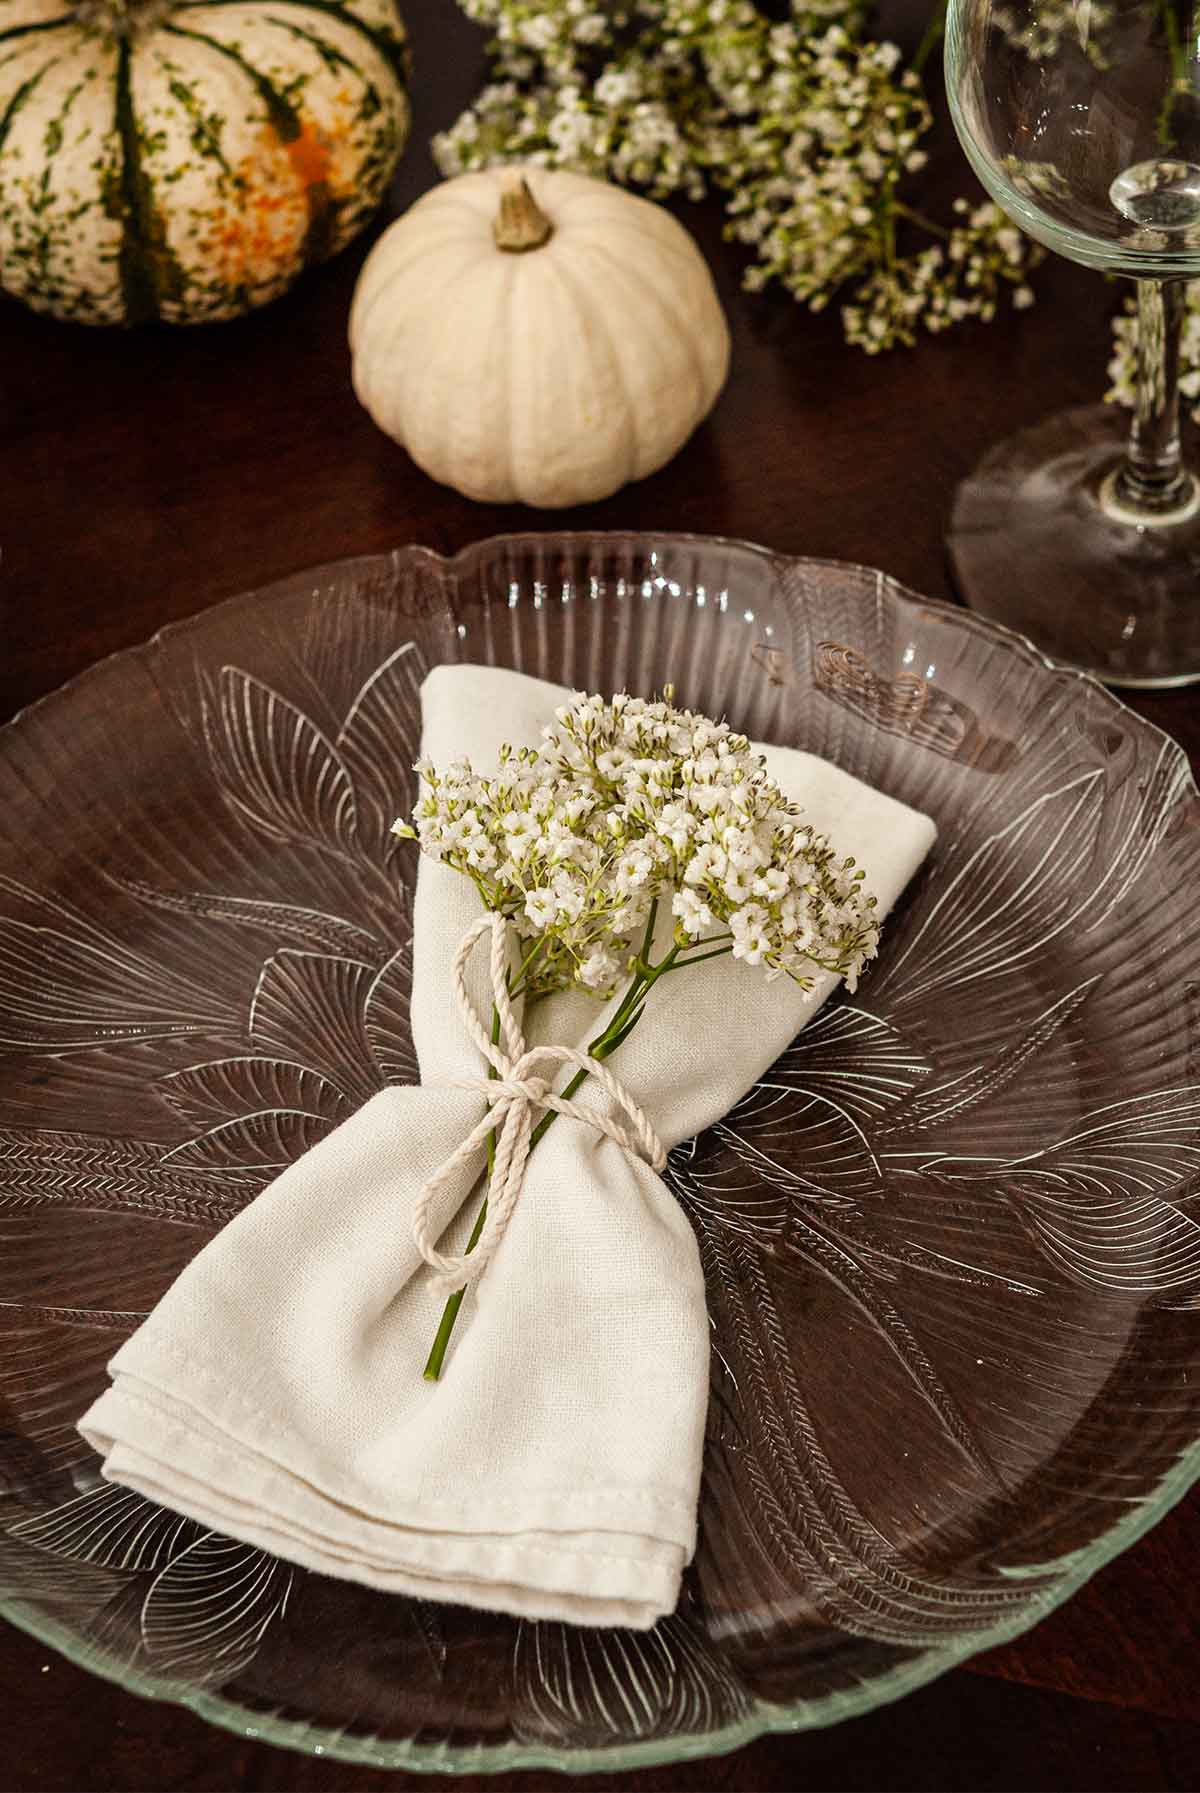 A plate with a napkin with flowers tied with string in front of small pumpkins and flowers on a table.